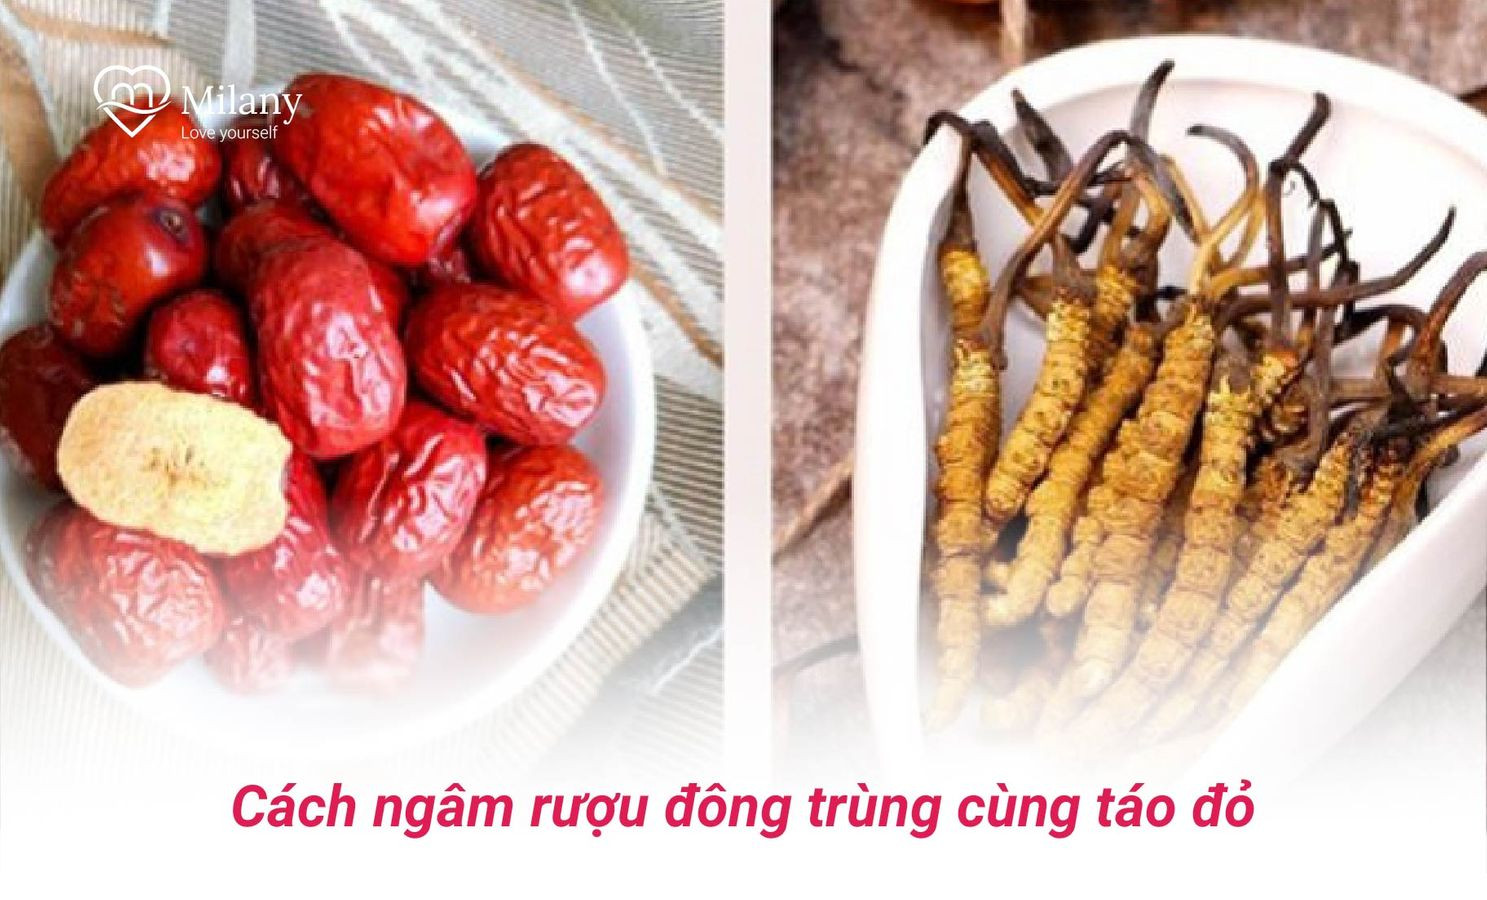 cach ngam ruou dong trung ha thao voi tao do